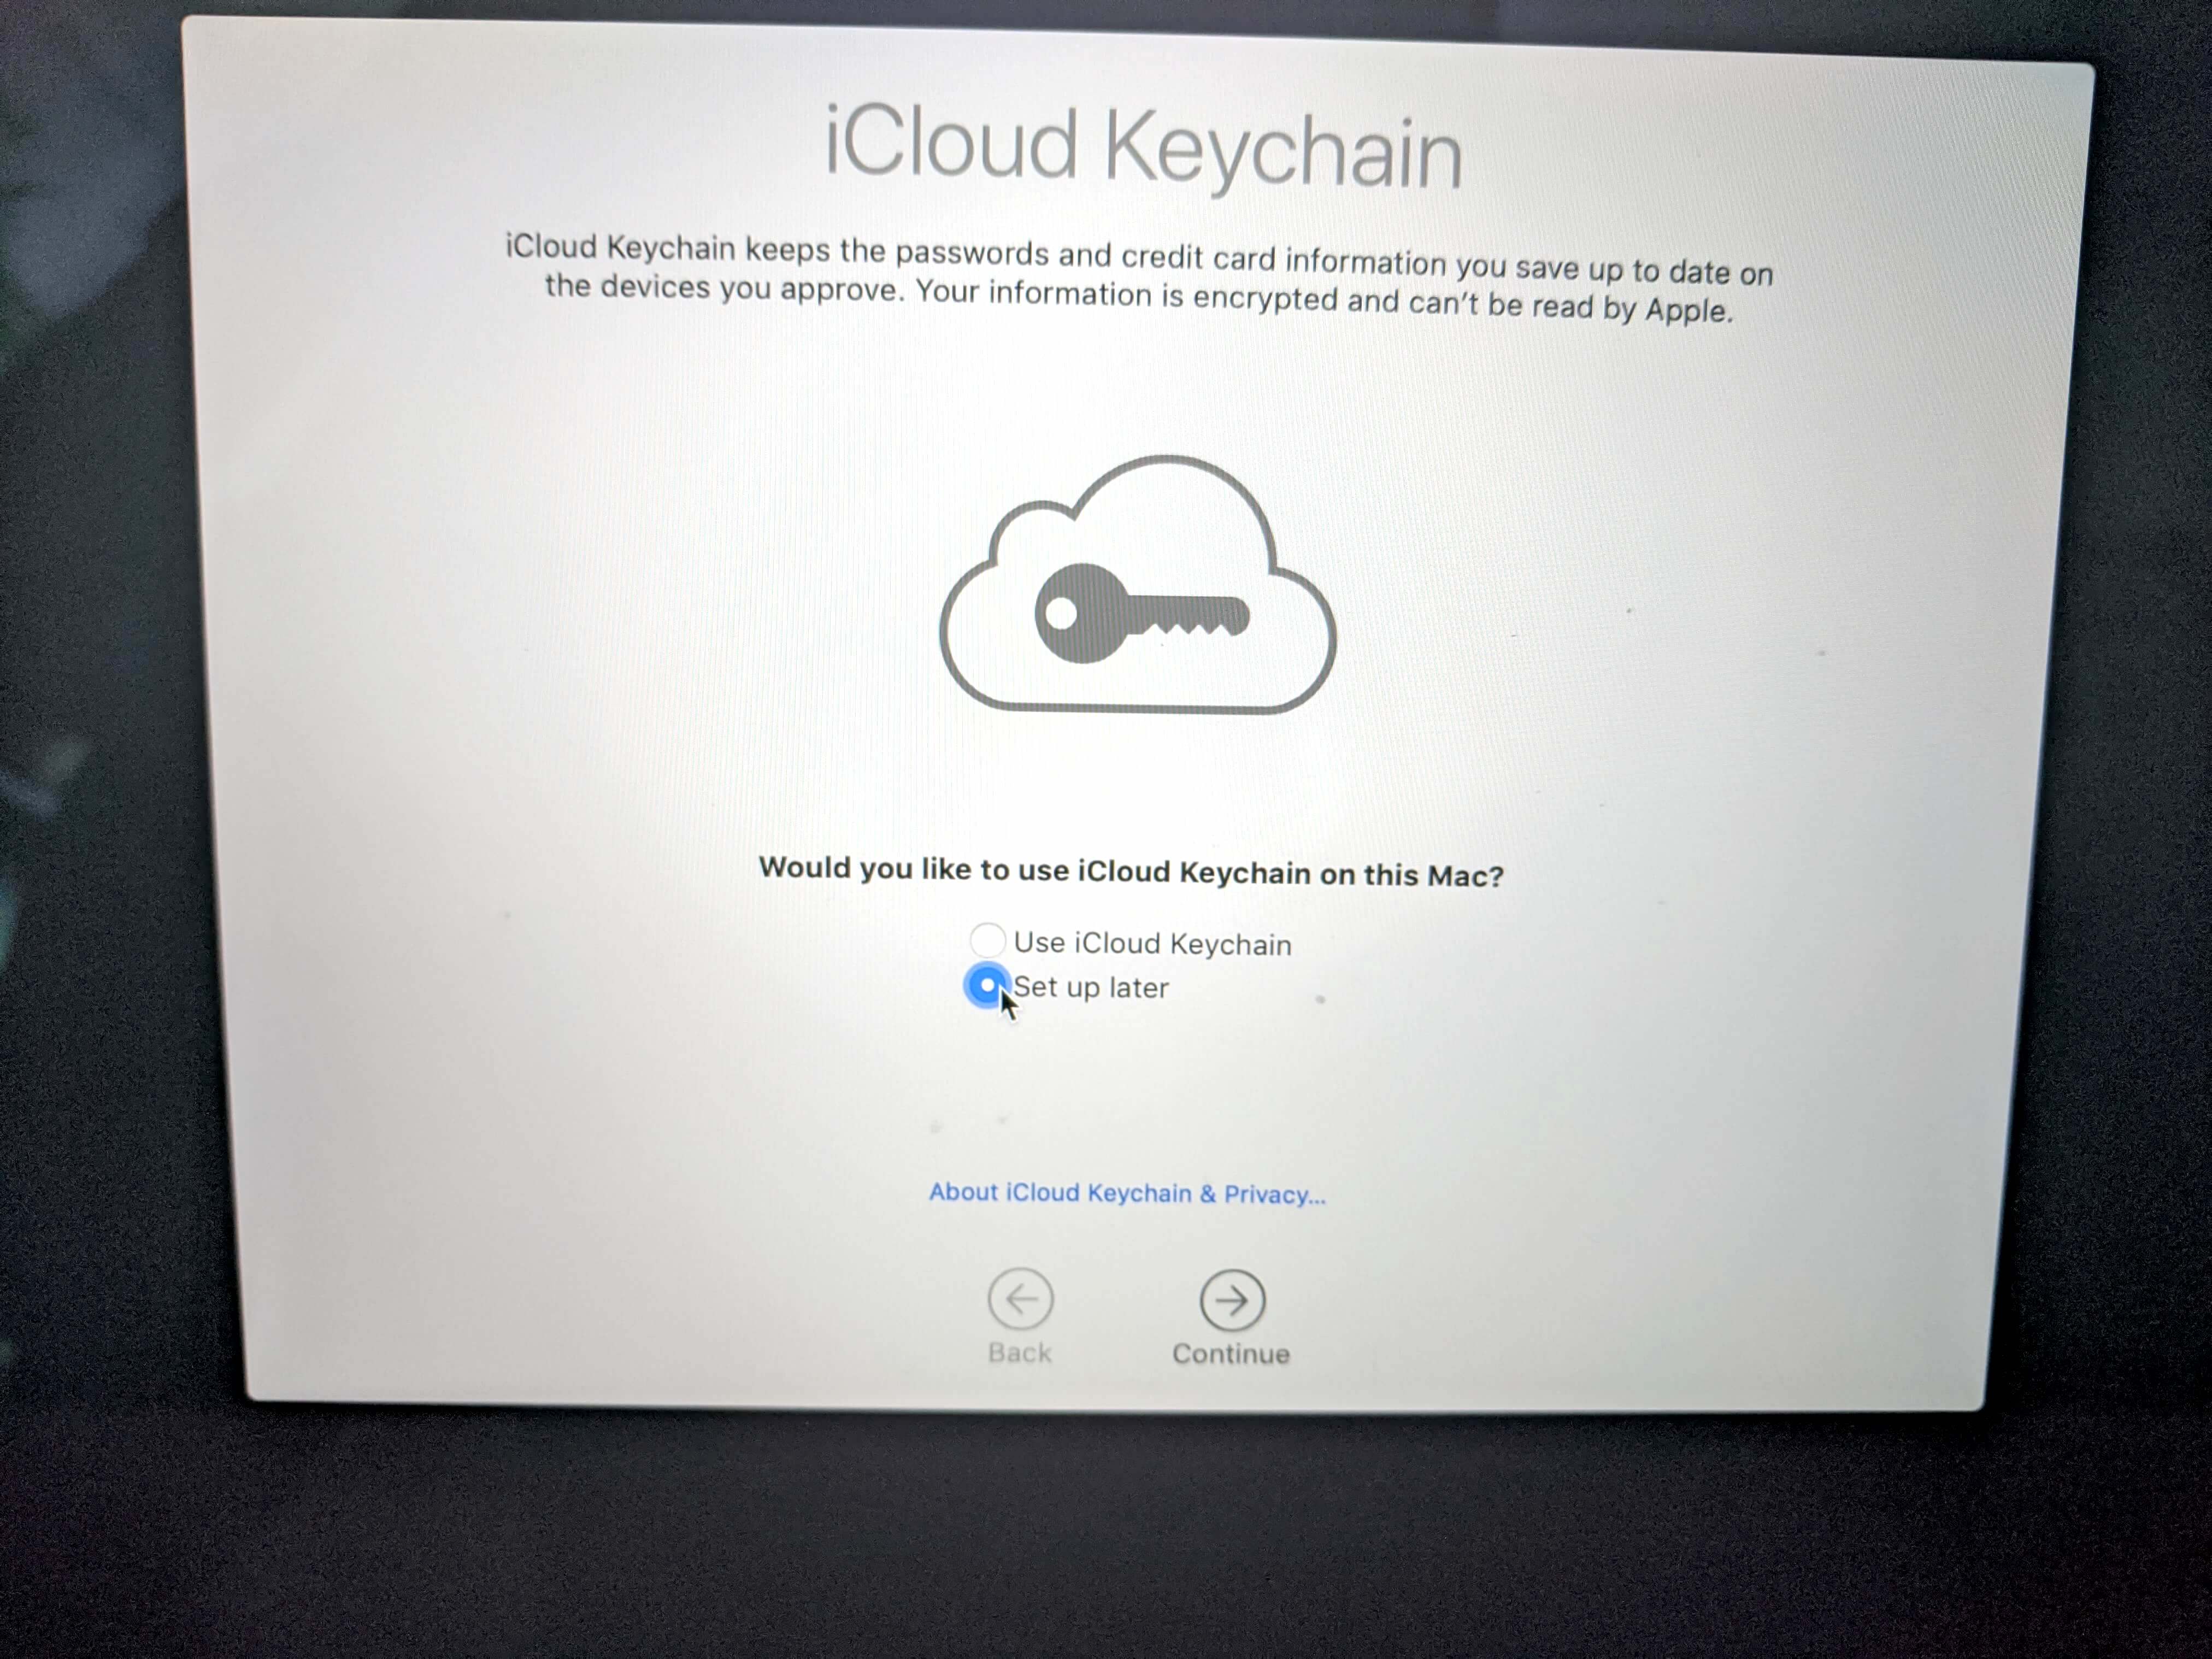 Select Set Up Later to not enable iCloud Keychain